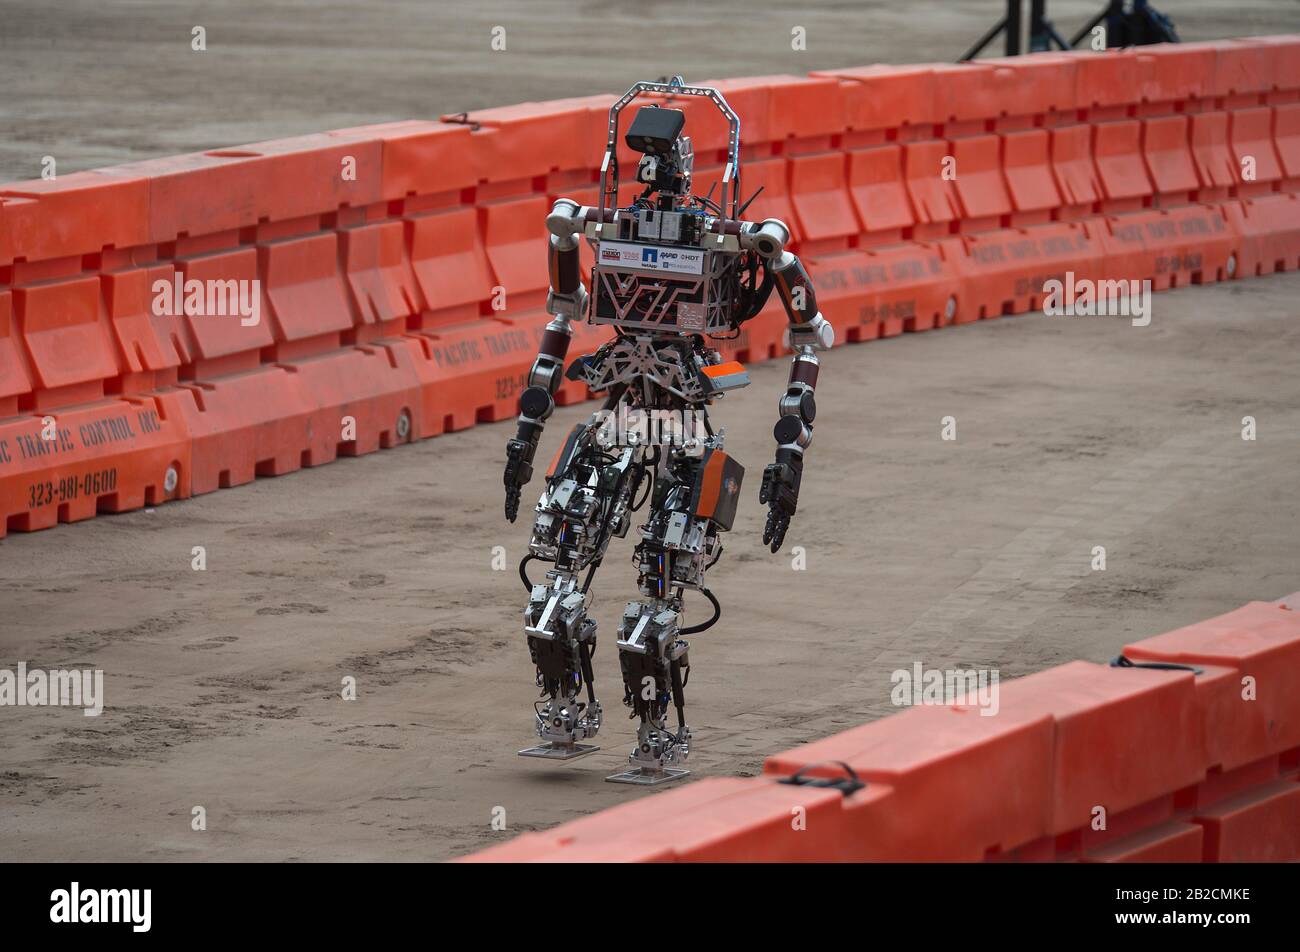 ESCHER, short for Electric Series Compliant Humanoid for Emergency Response, walks independently on two feet during the Defense Advanced Research Projects Agency Robotics Challenge June 6, 2015 in Pomona, California. The robot was designed, fabricated and assembled by engineering students at Virginia Tech. Stock Photo